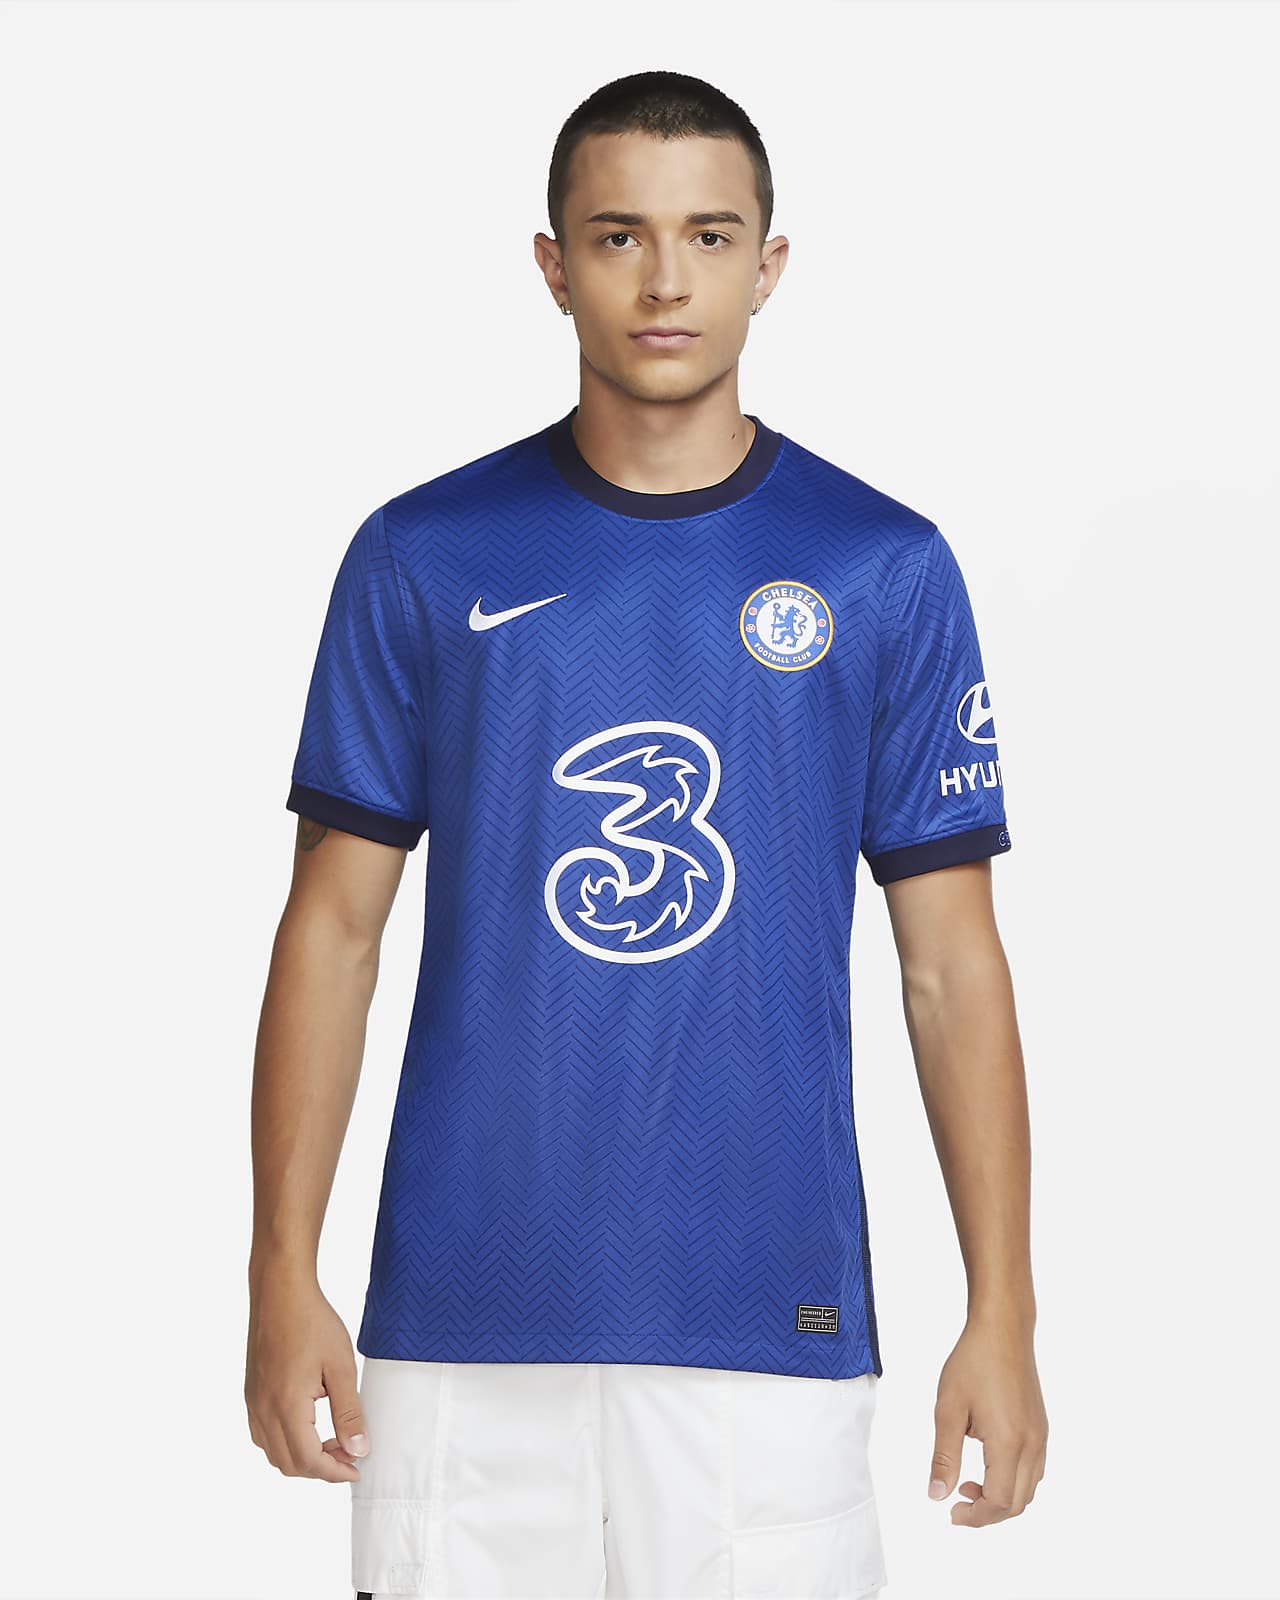 chelsea maillot 2020